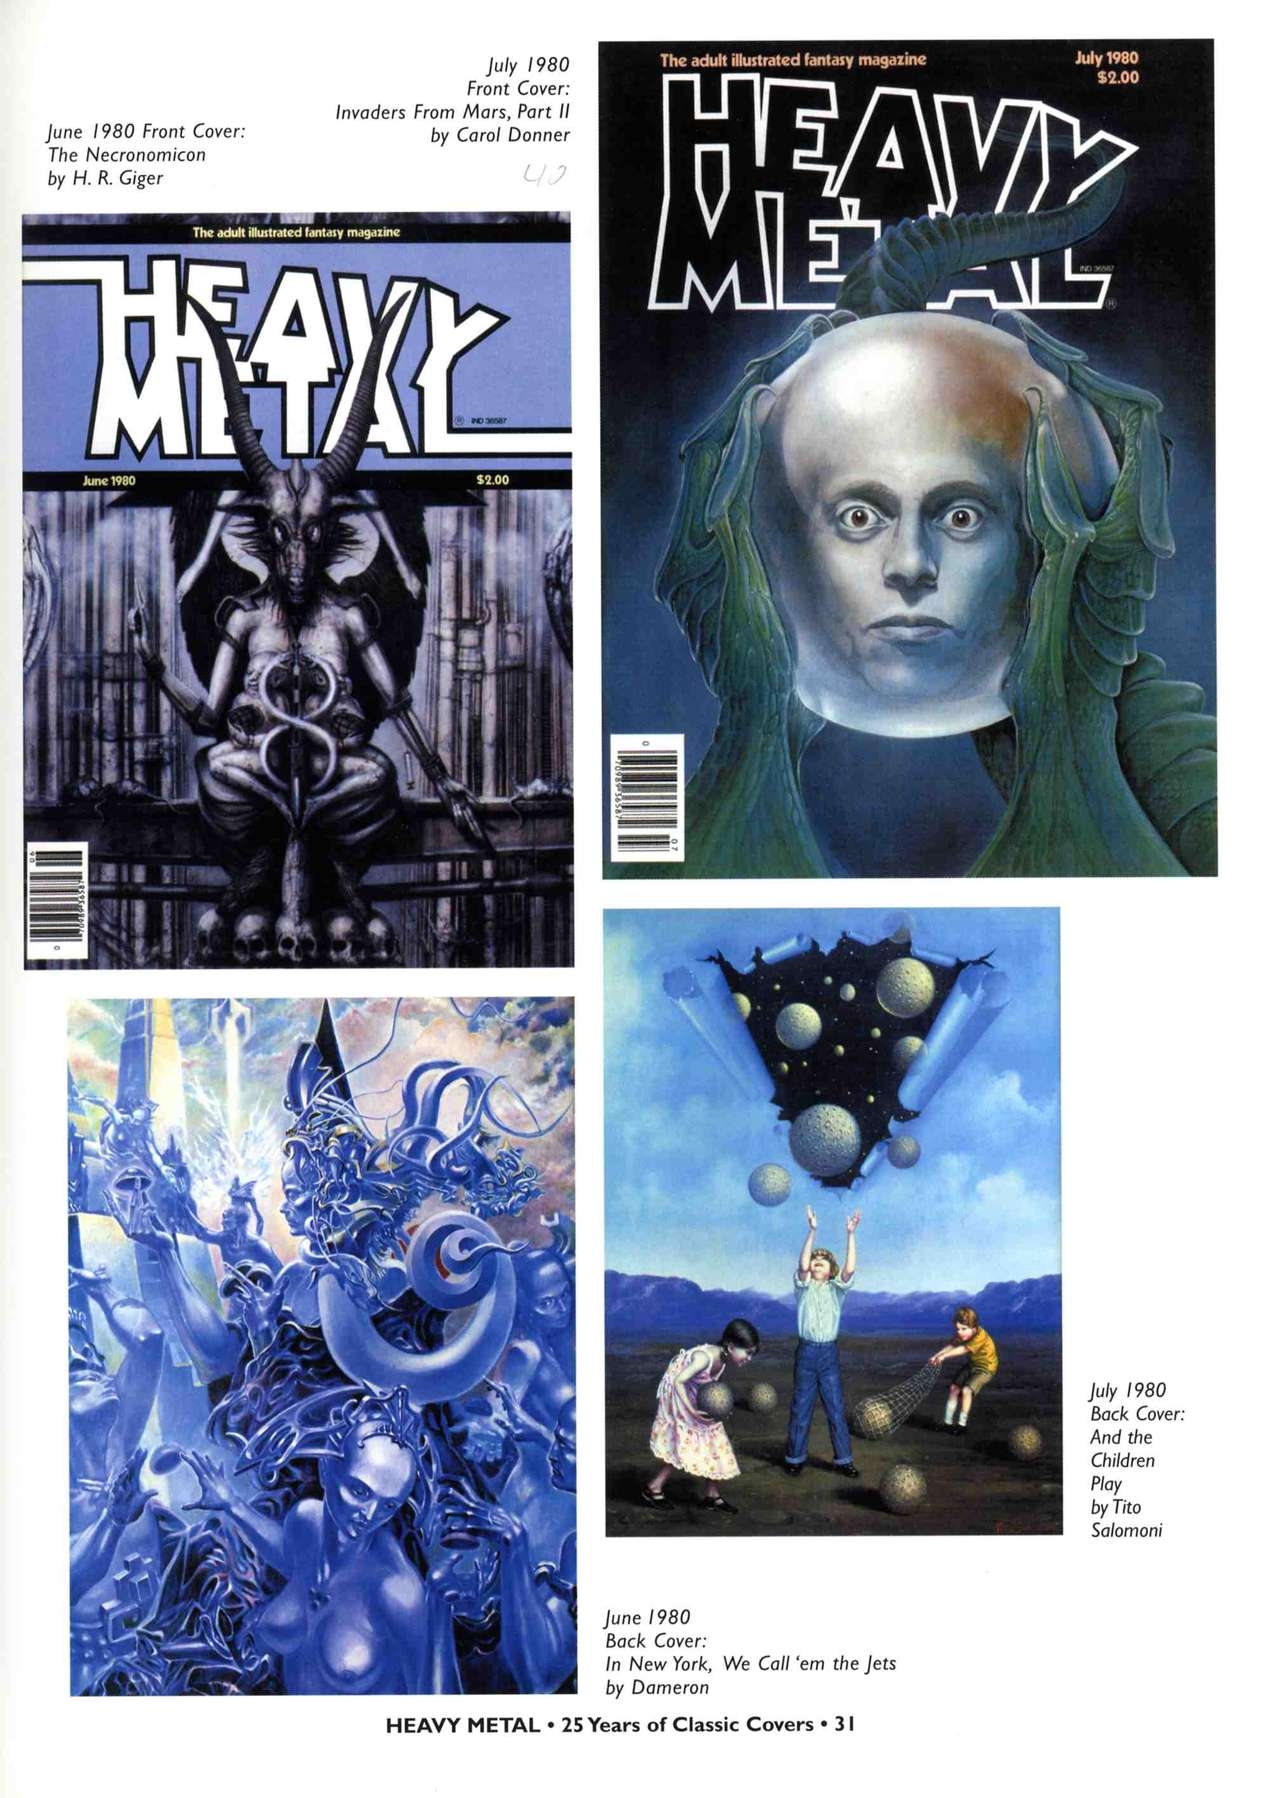 HEAVY METAL 25 Years of Classic Covers 36